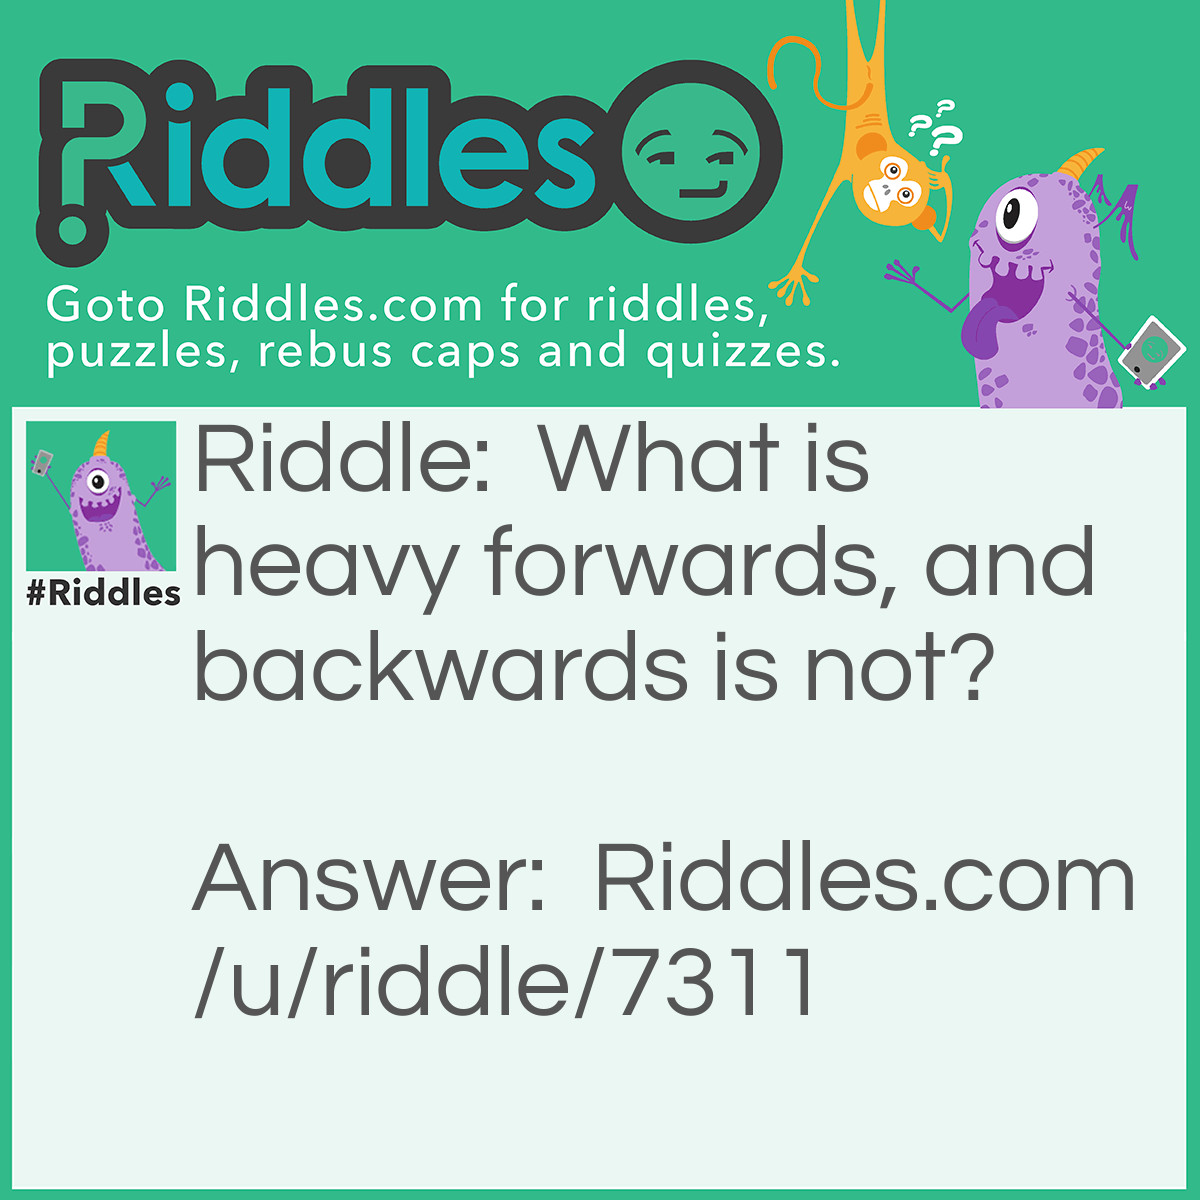 Riddle: What is heavy forwards, and backwards is not? Answer: A ton